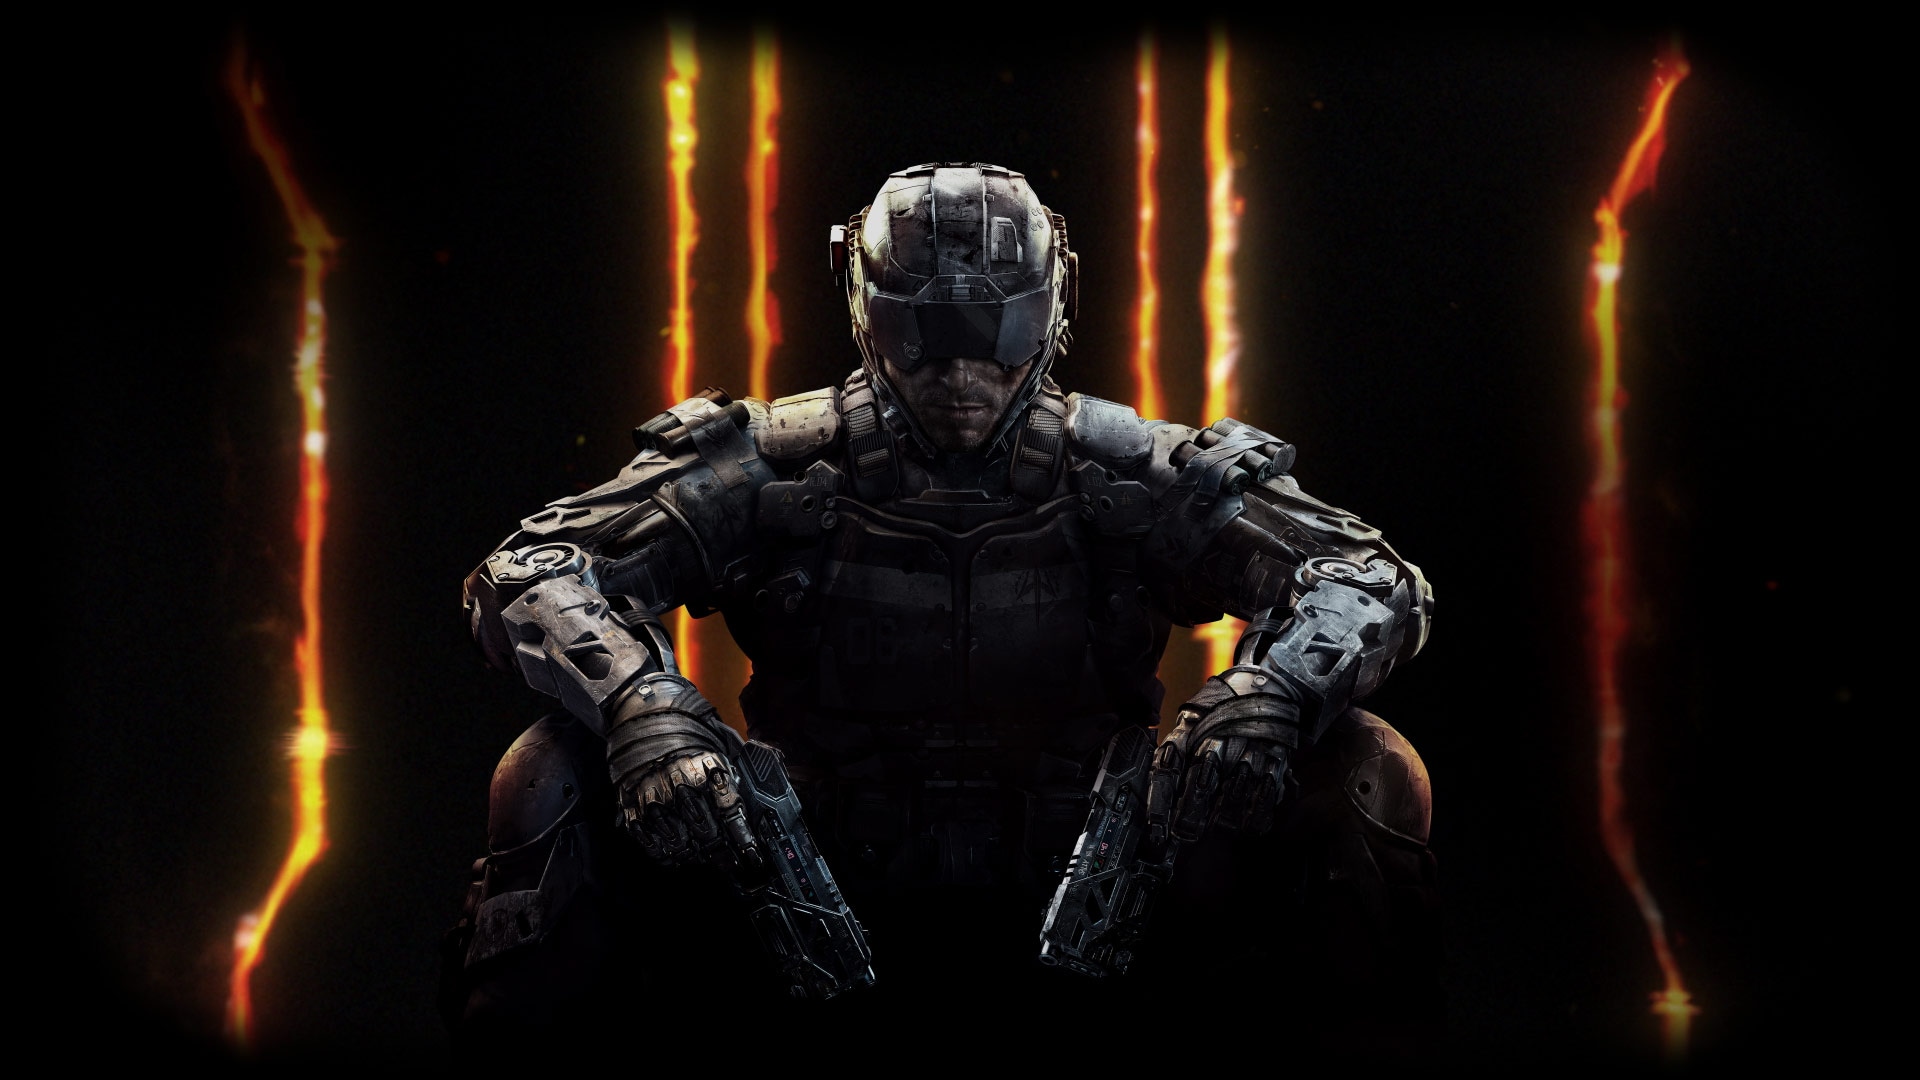  Call Of Duty Black Ops III HD Wallpapers Backgrounds